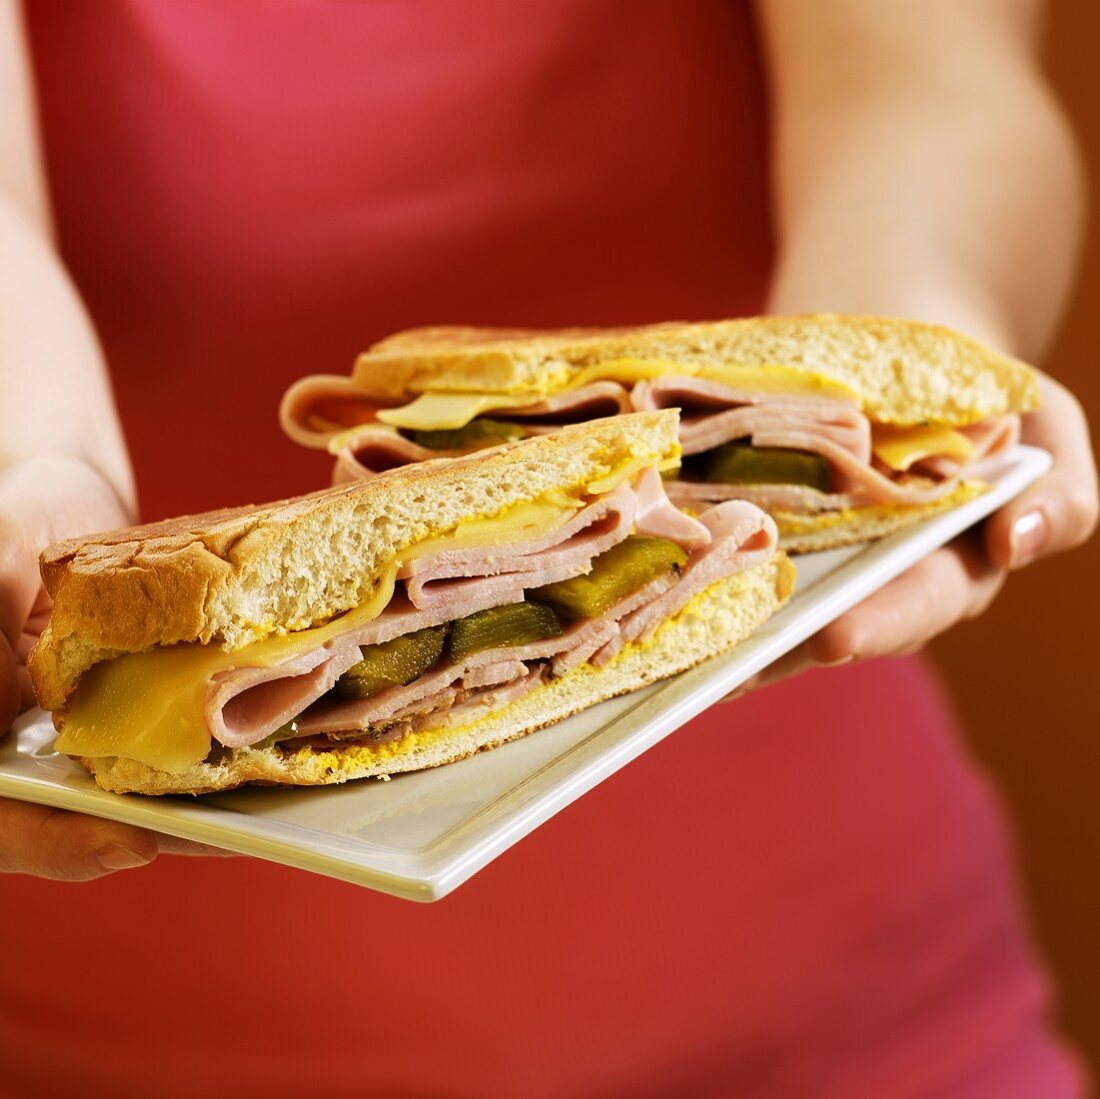 Hands Holding a Plate with Cuban Sandwich